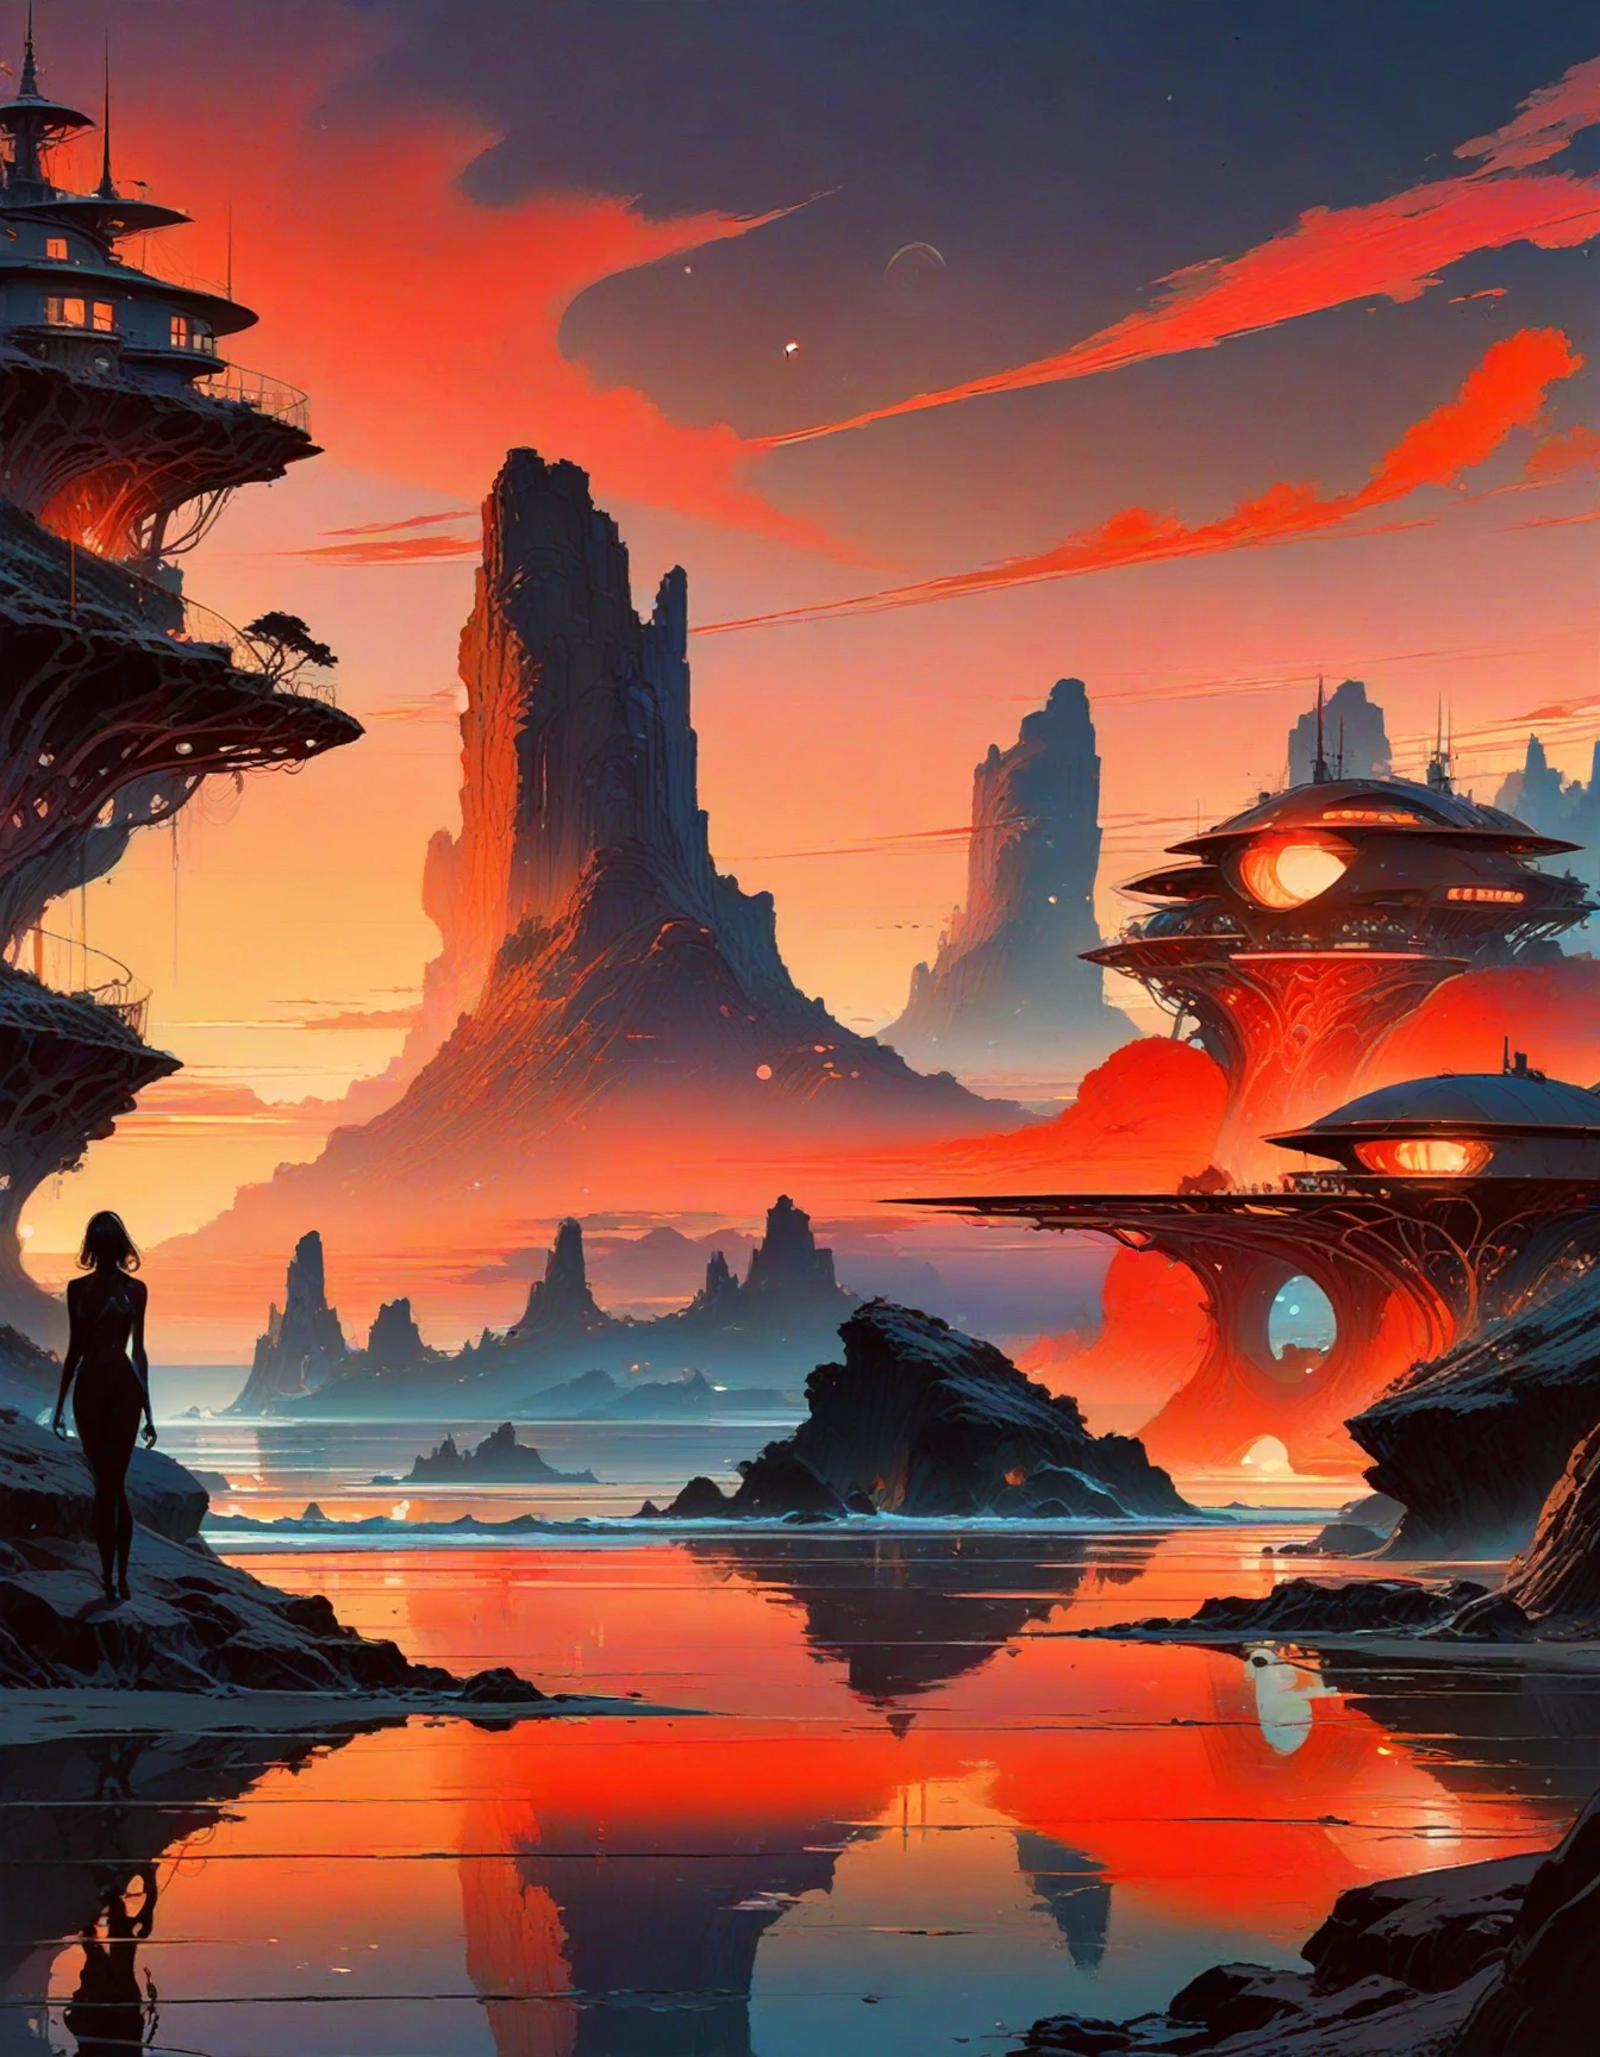 A beautiful, wonderous sci fi village in a coastal strand, depicted with vibrant colors and surreal landscapes, merging or...